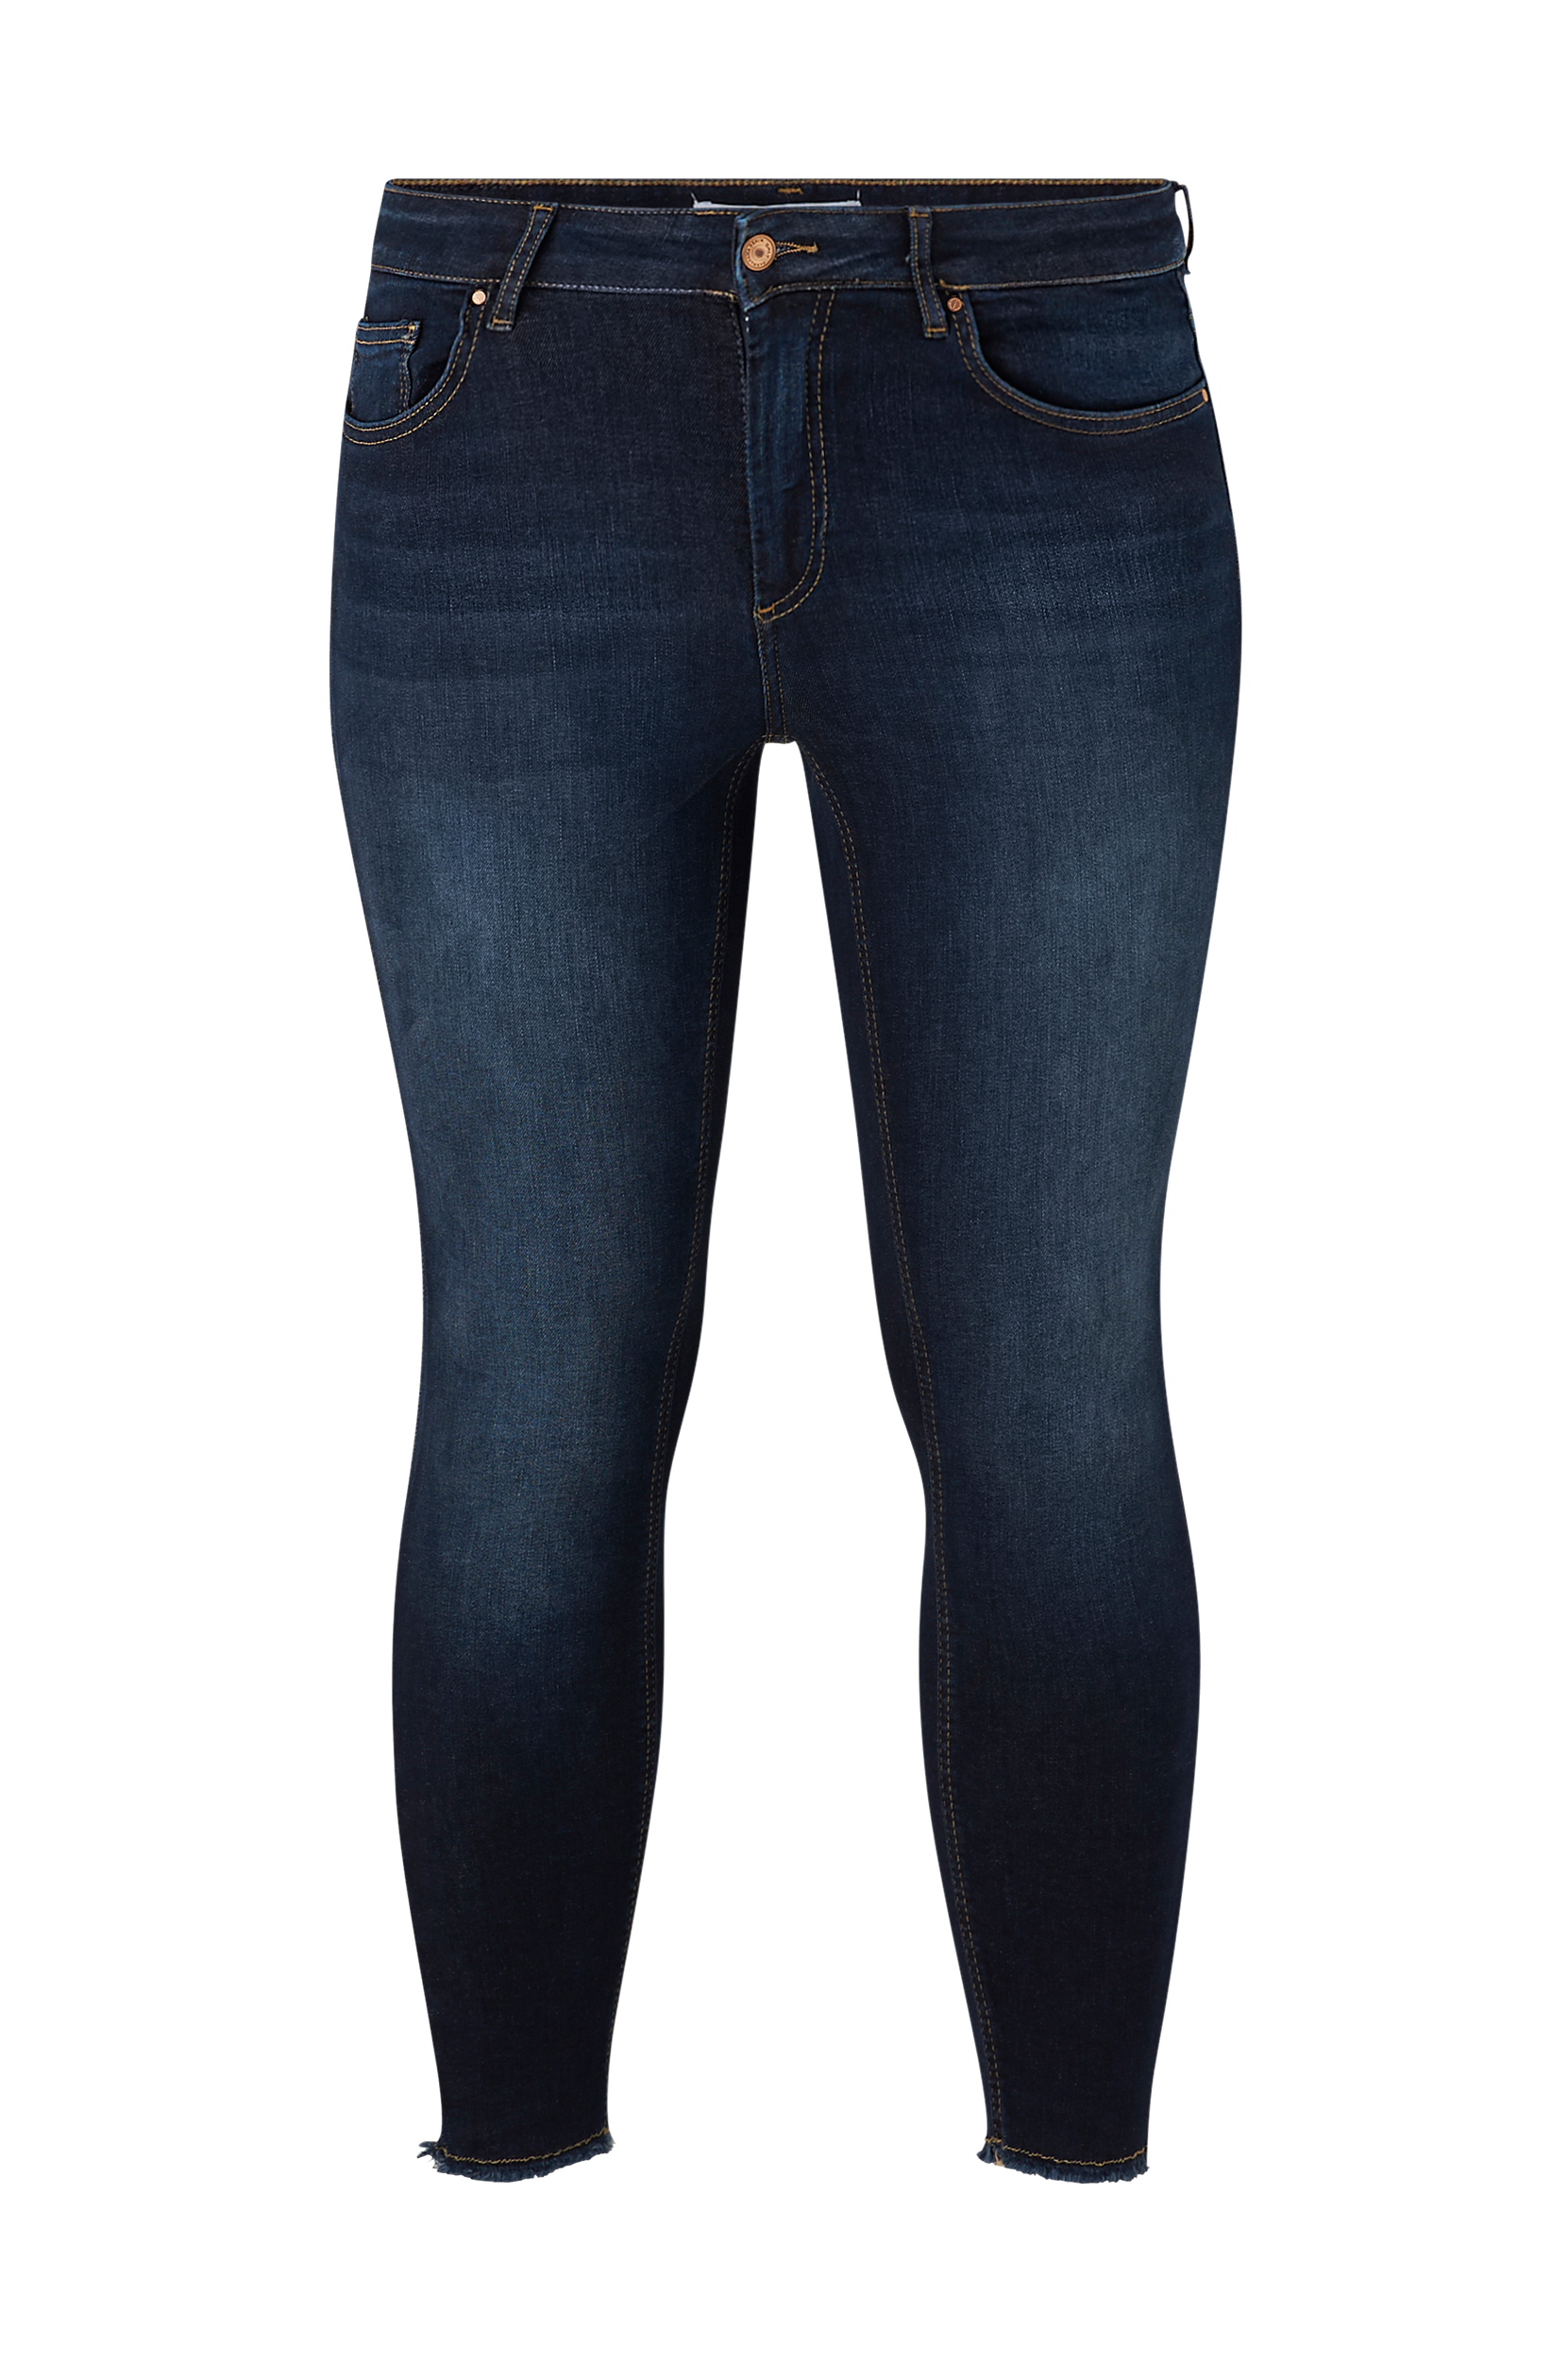 Only Carmakoma - Jeans carWilly Life Reg Sk Ank Raw - Blå - W46/L34